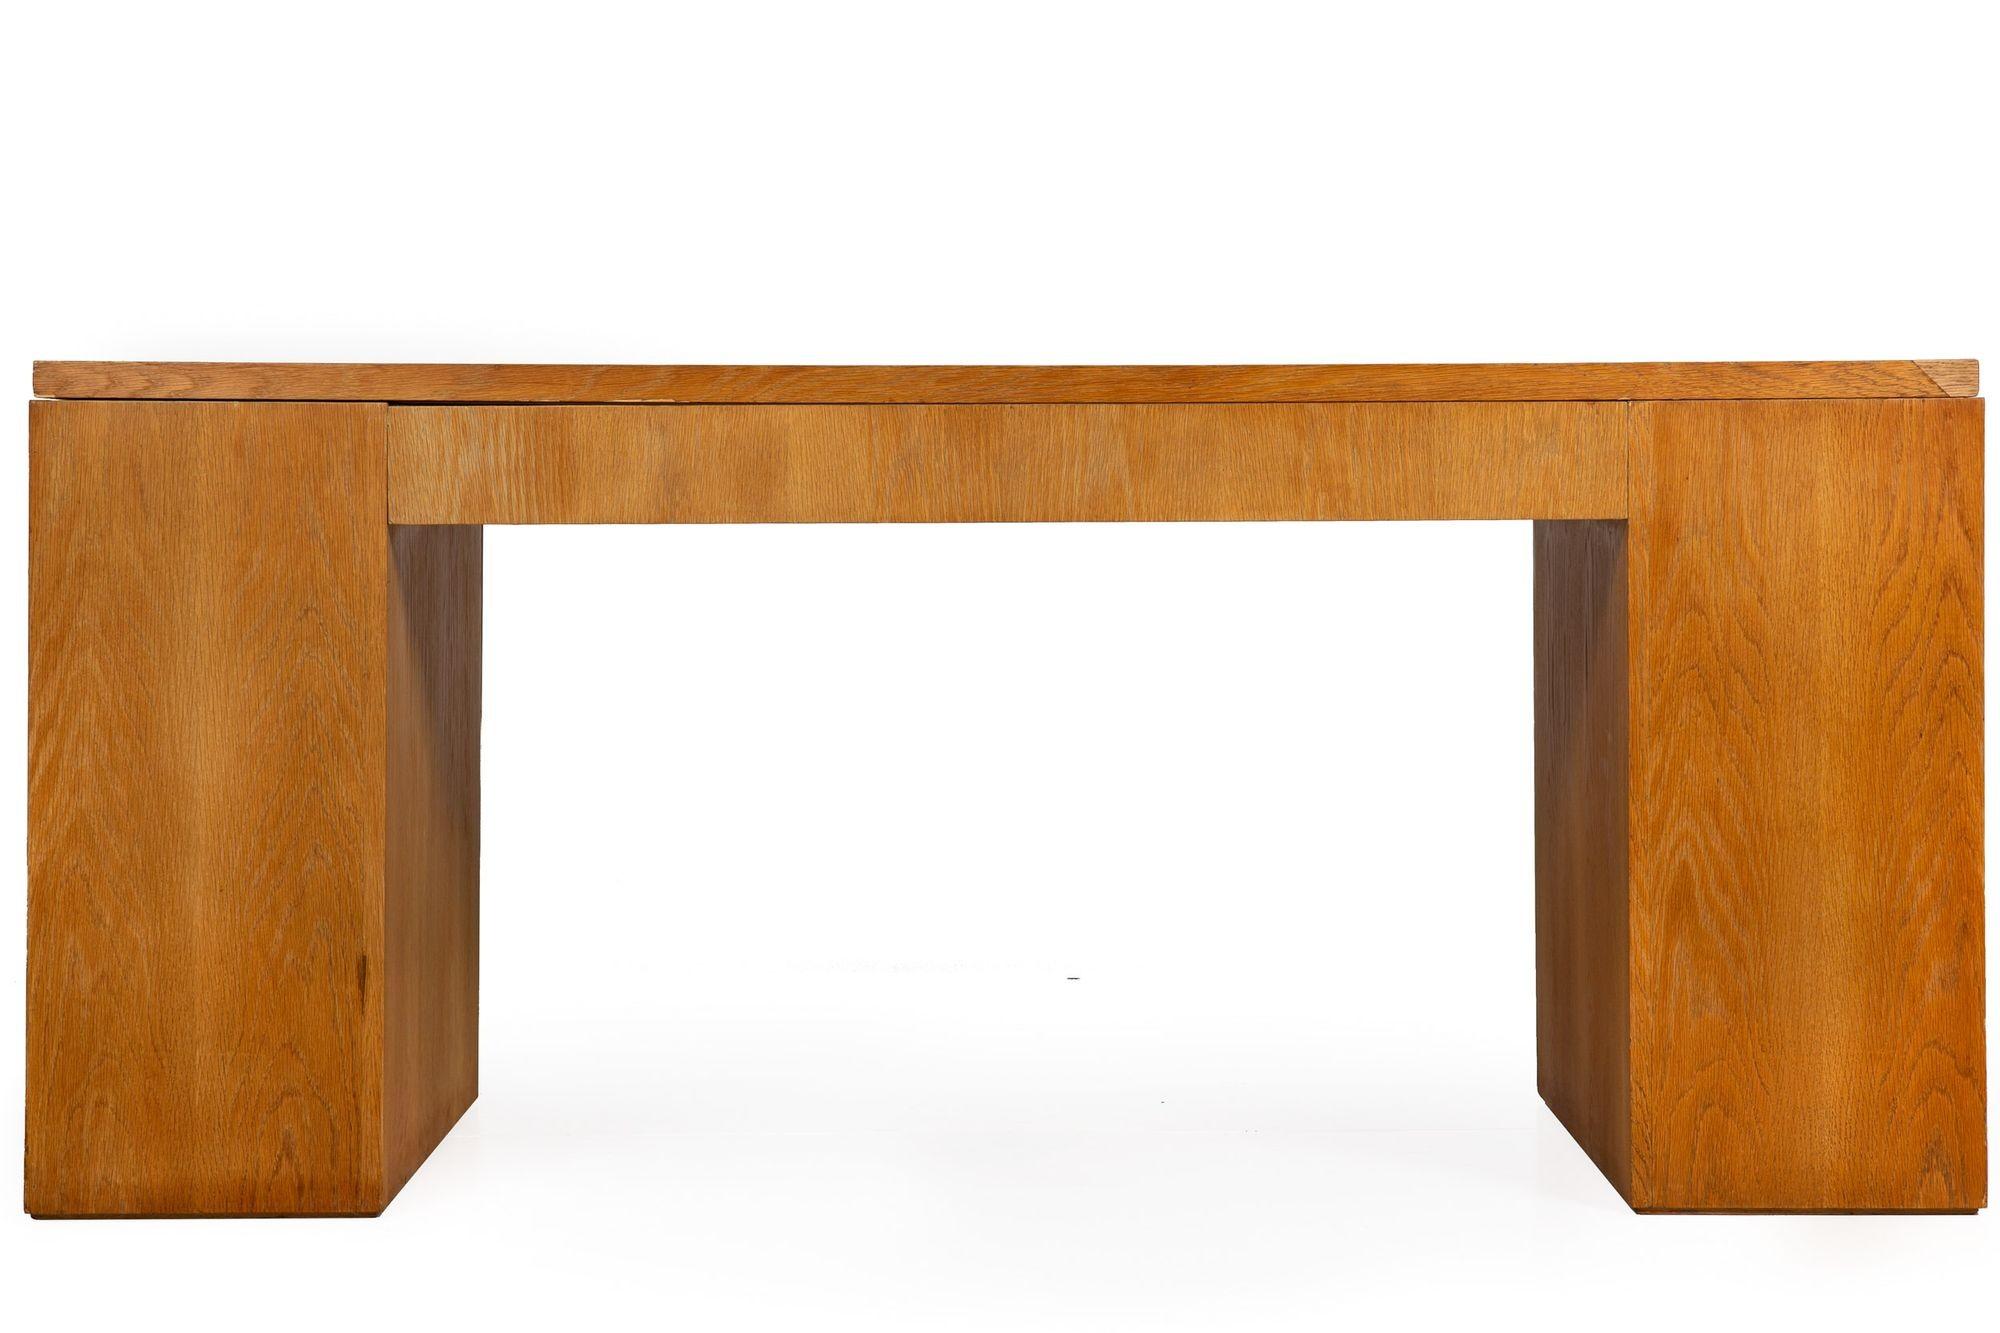 European French Modernist Cerused Oak and Lacquered Skin Pedestal Desk ca. 1950s For Sale